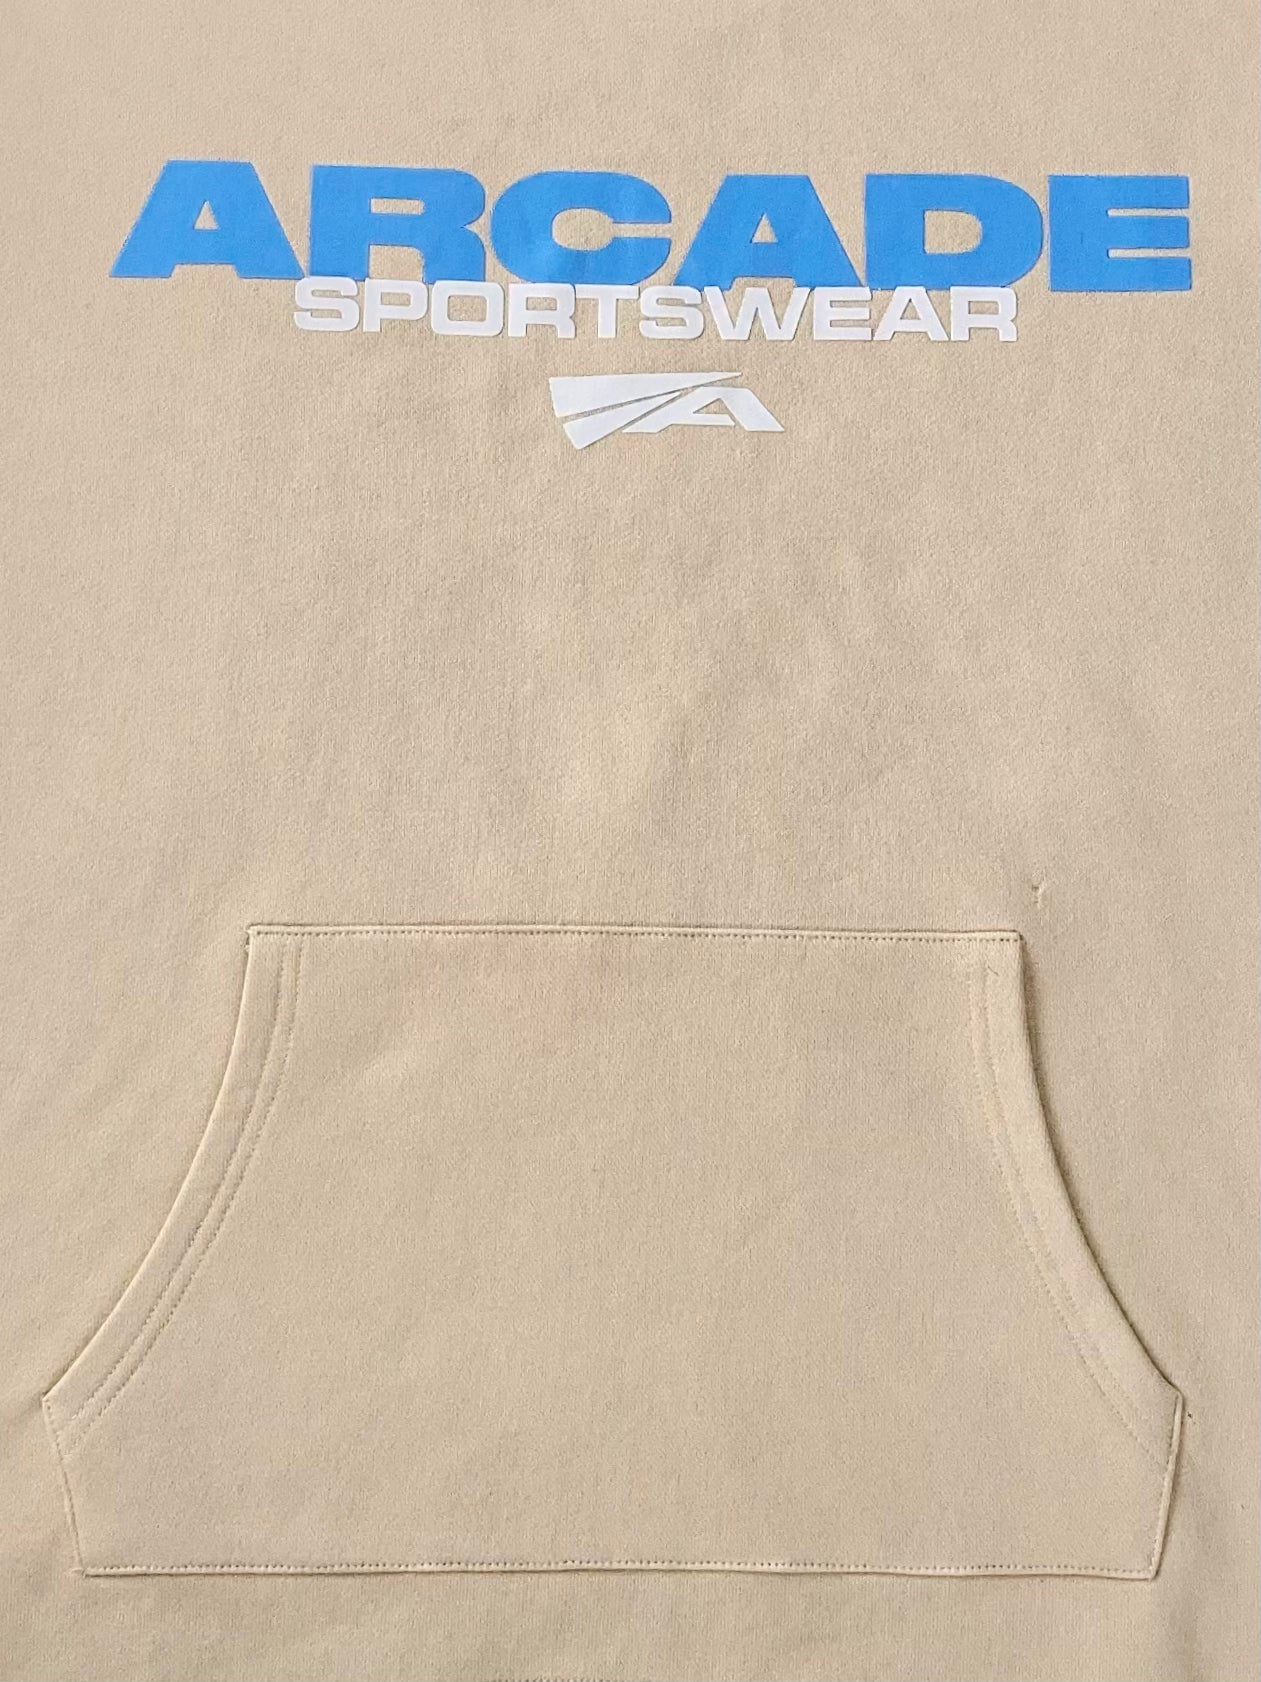 Arcade Sportswear Hoodie Tan Features: Screen printed “Arcade Sportswear” Graphic w/ logo on chest Heavyweight 420 GSM 100% French Terry Cotton Oversized loose fit Semi-cropped w/ drop shoulders Adjustable cord lock on waist